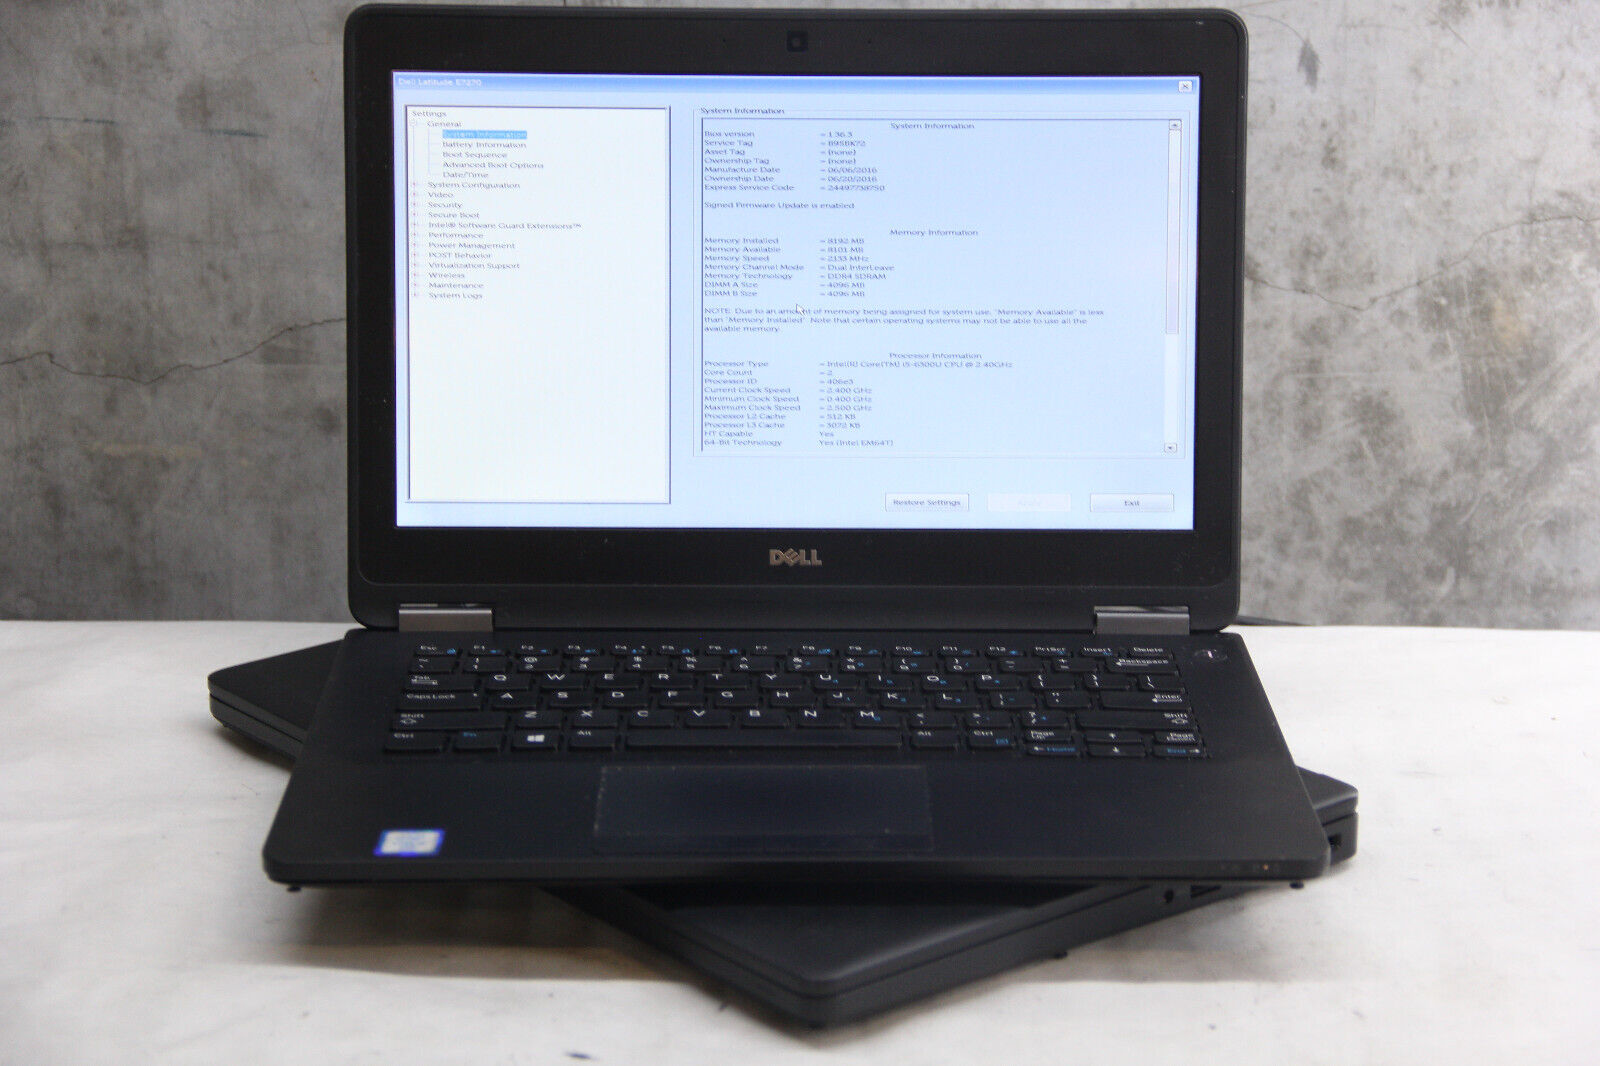 Lot of 2 Dell Latitude Laptops As-Is for Parts/Repair. See Description